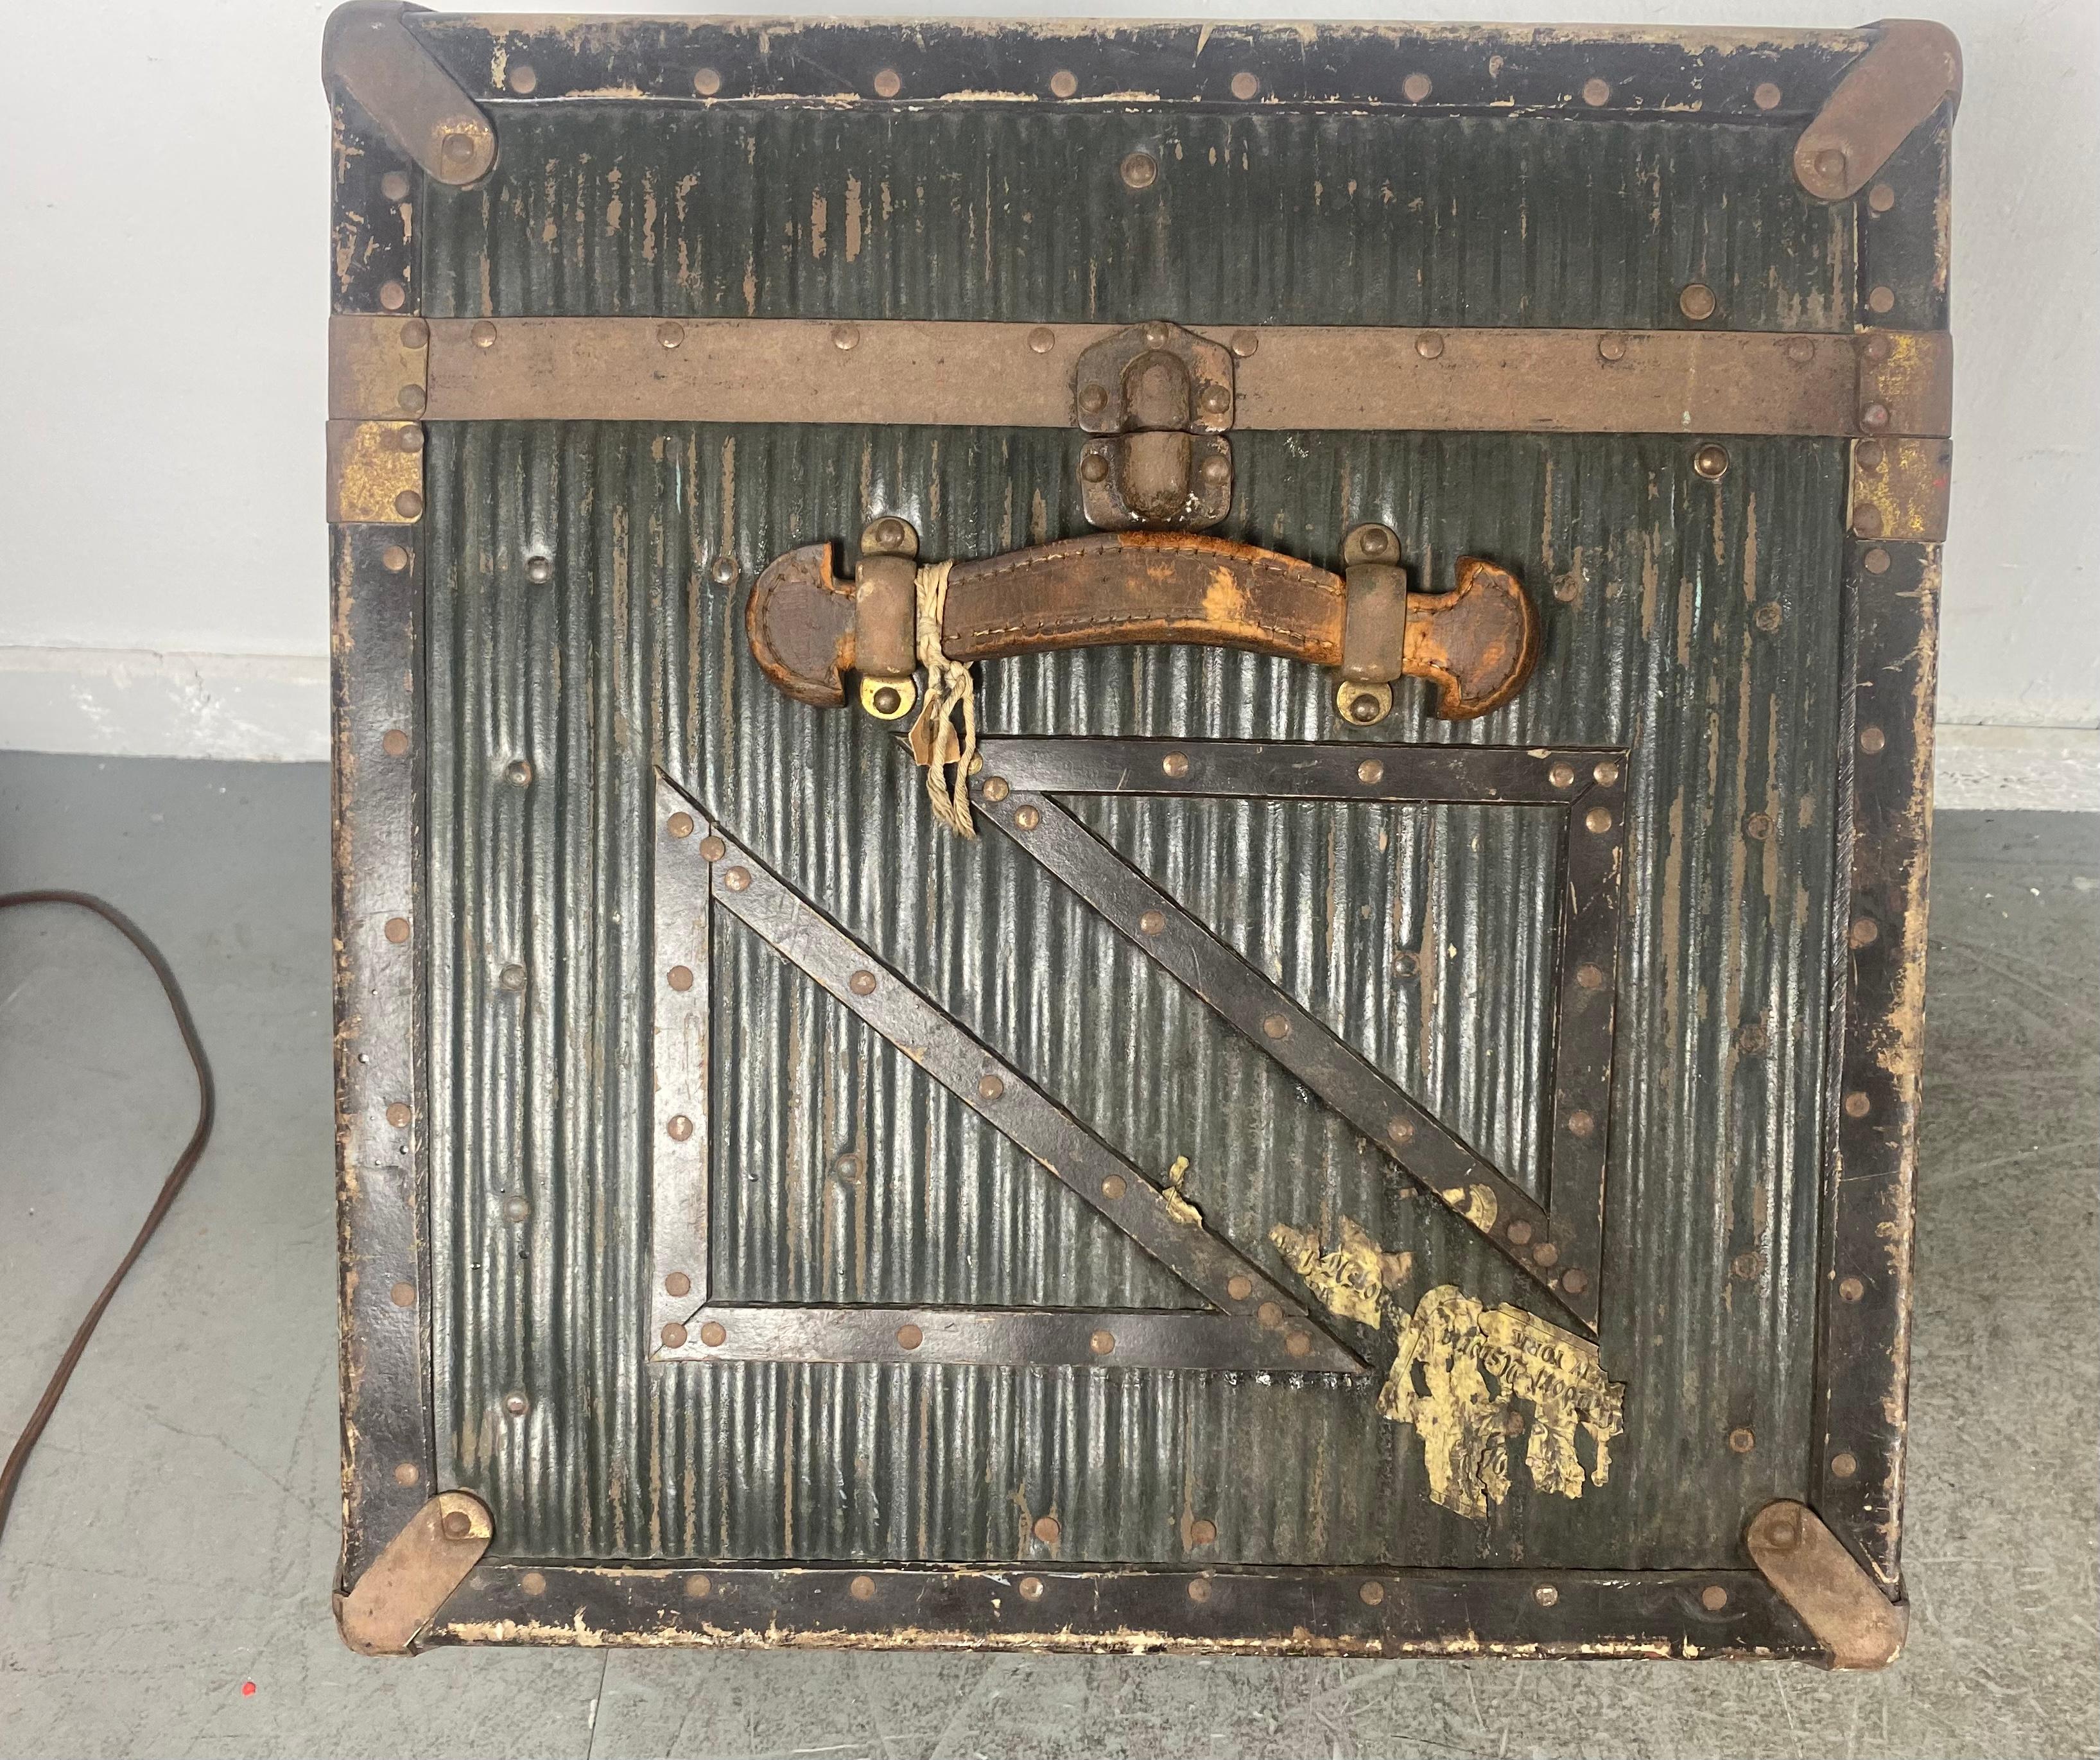 North American 19th Century Travel Trunk by Innovation, , , great size 25 x 25 x25 For Sale